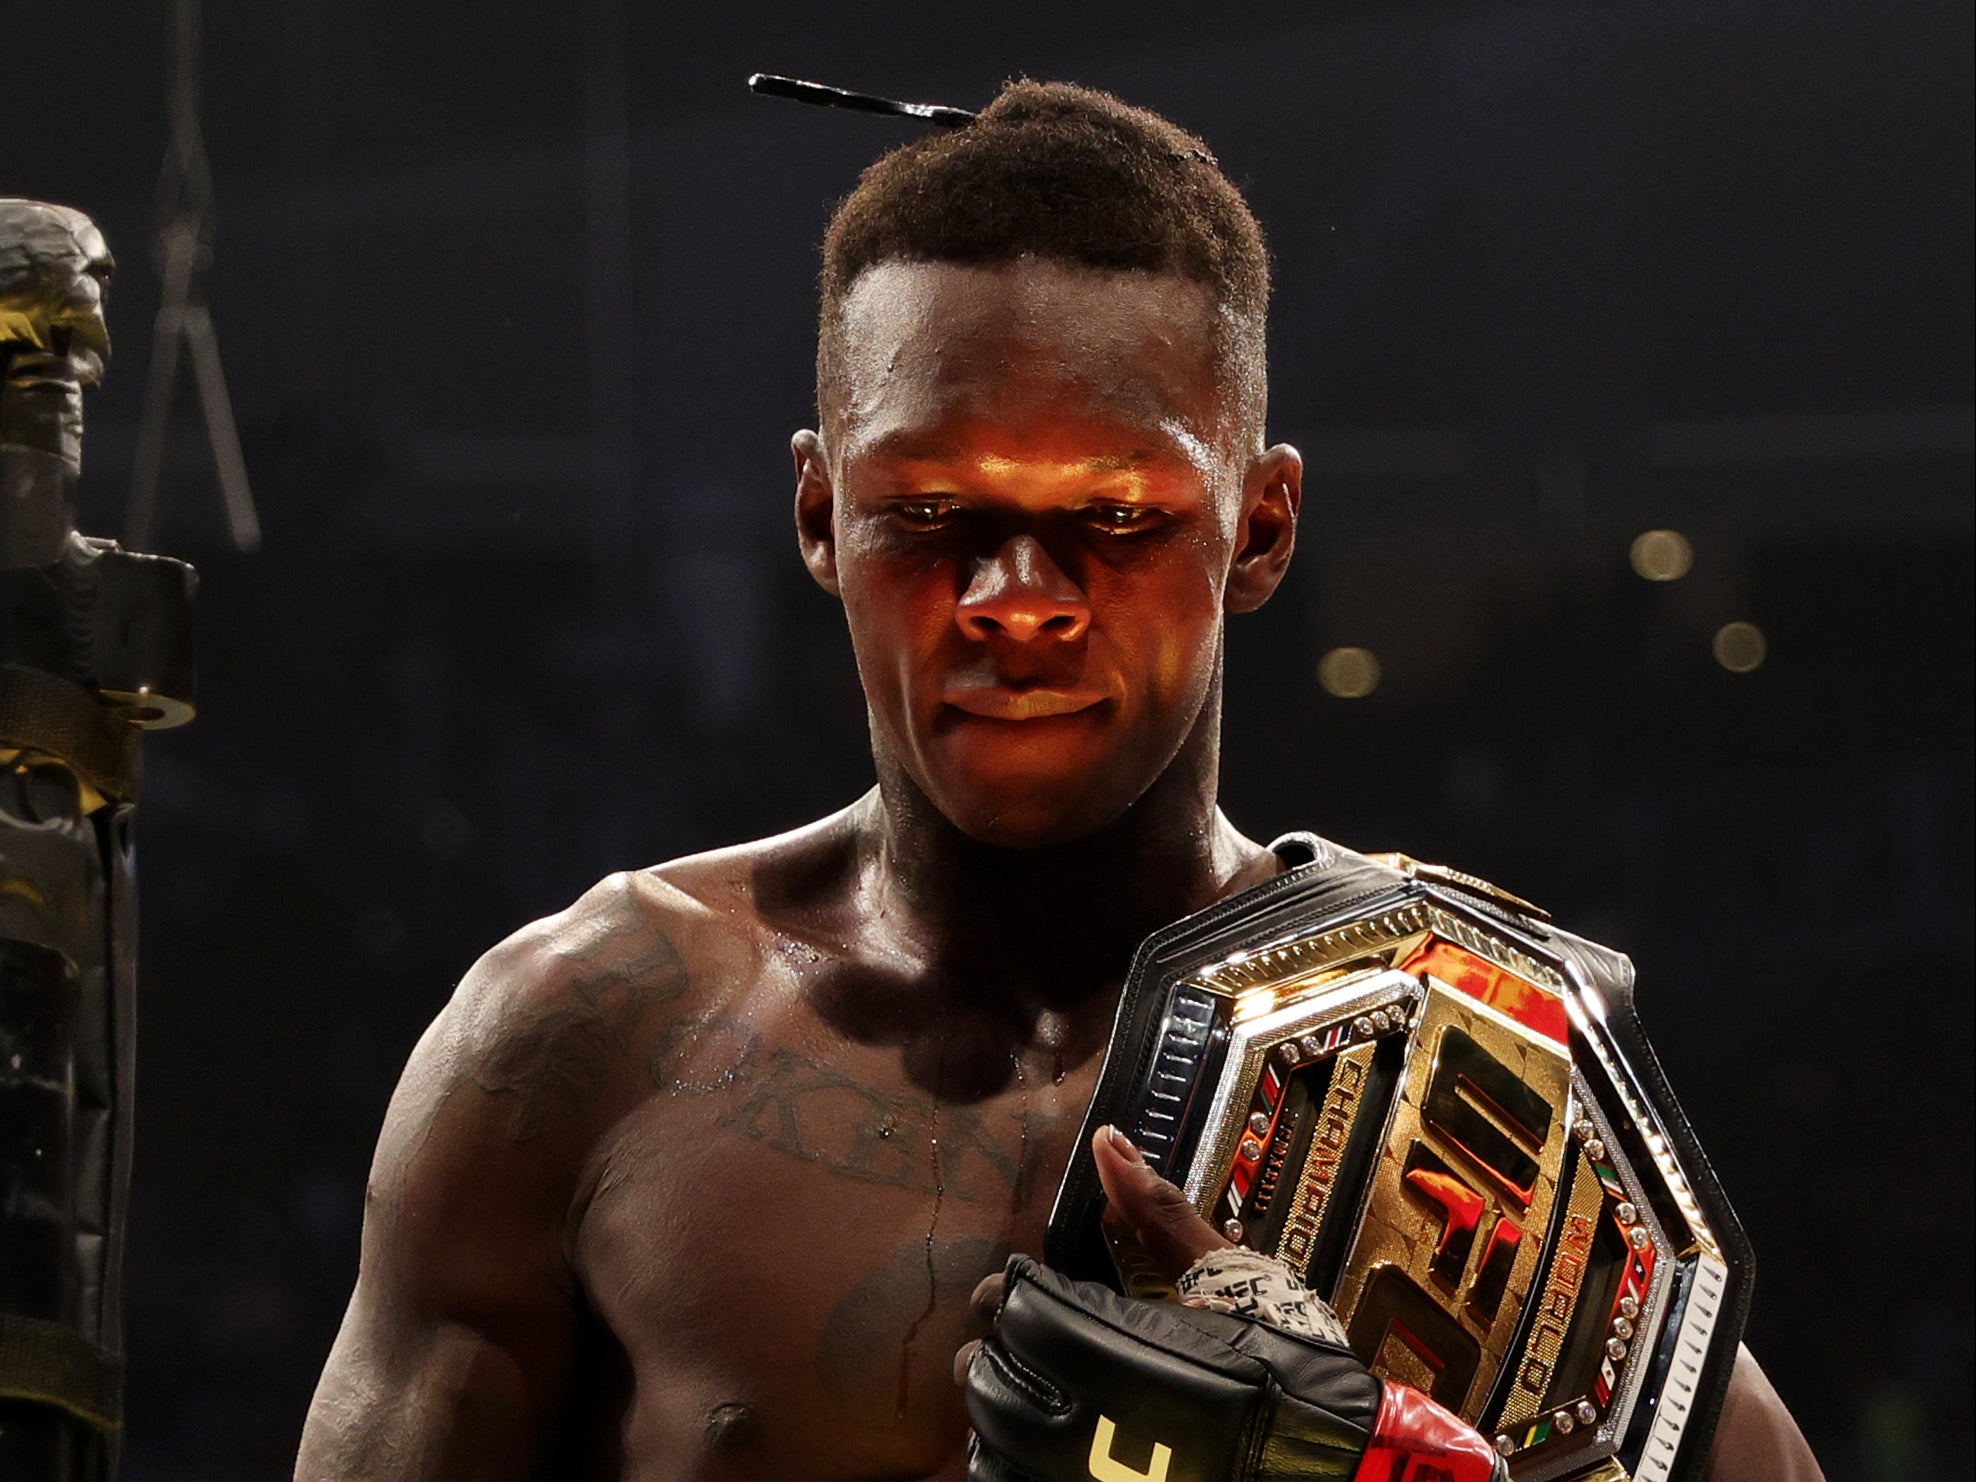 Israel Adesanya made a fourth straight successful title defence at UFC 271